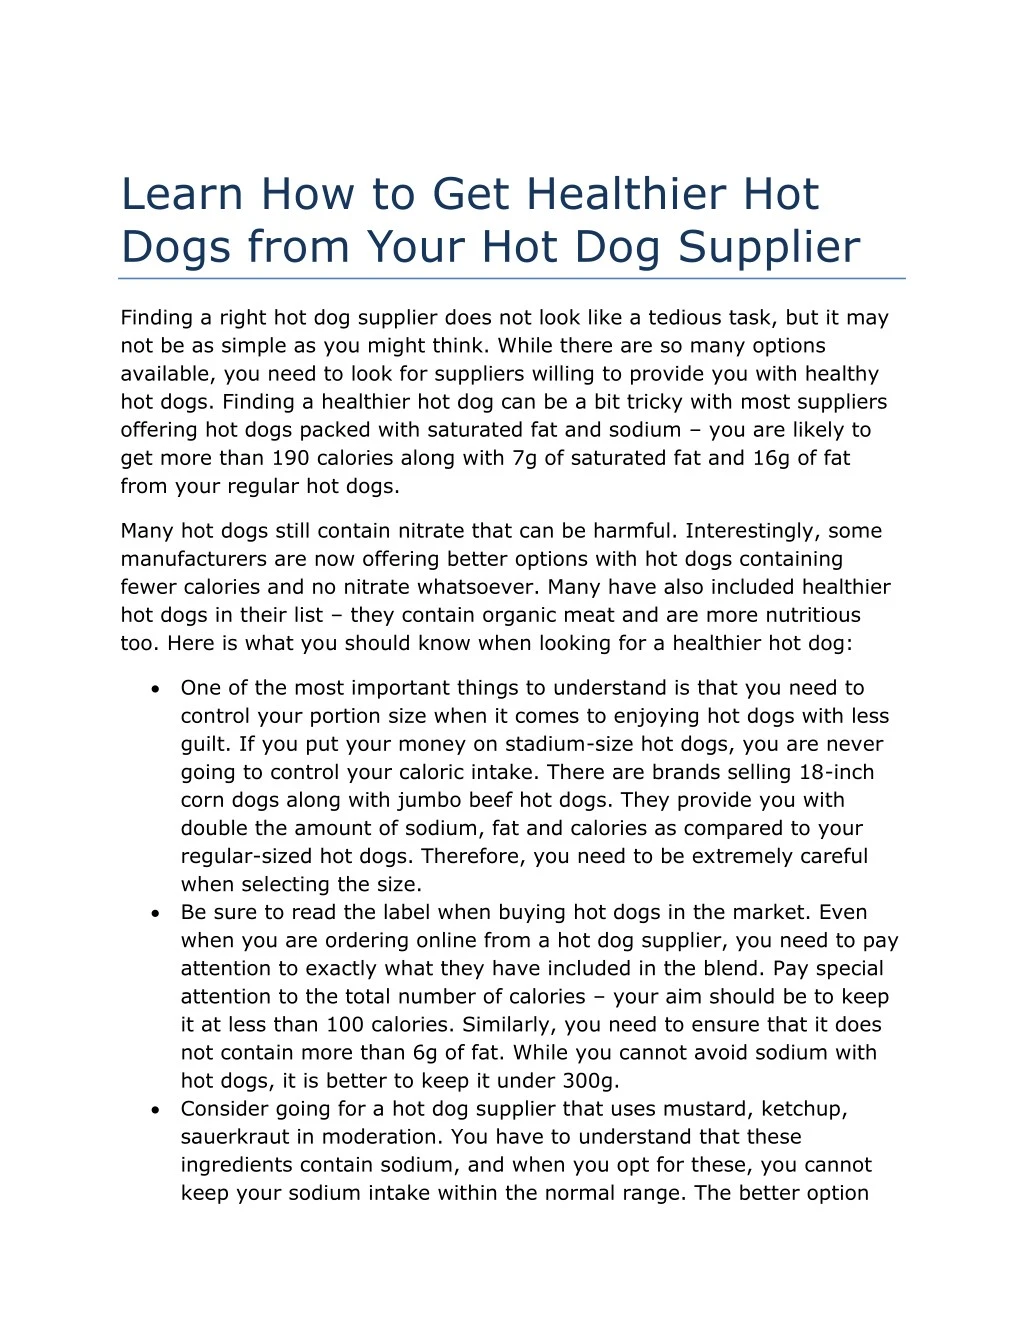 learn how to get healthier hot dogs from your